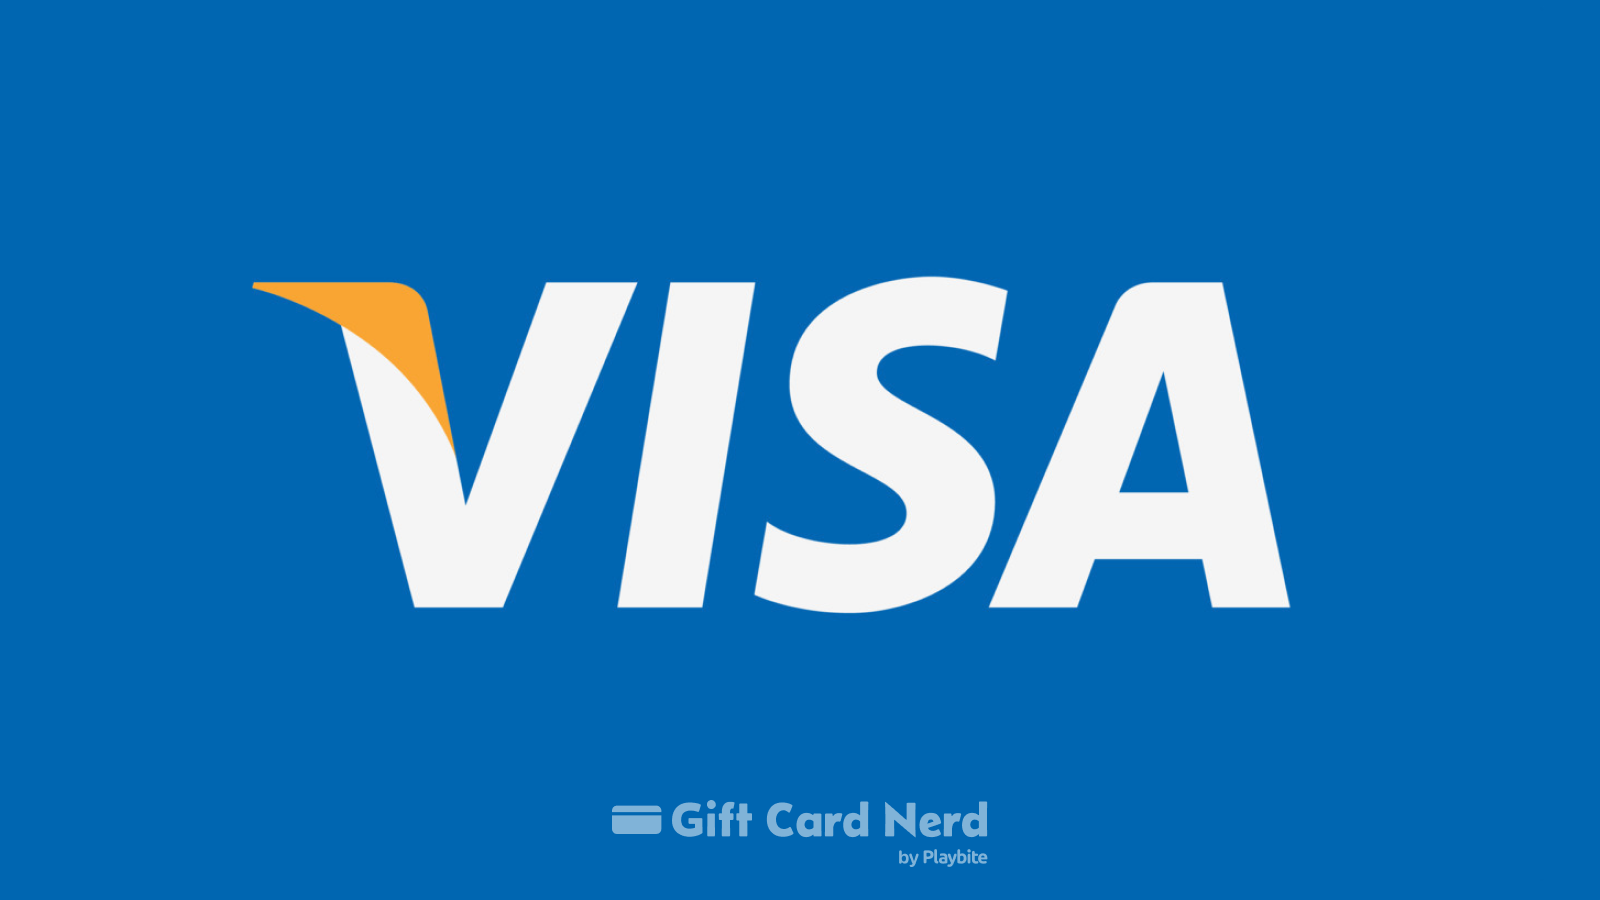 How to Check the Balance on a Visa Gift Card